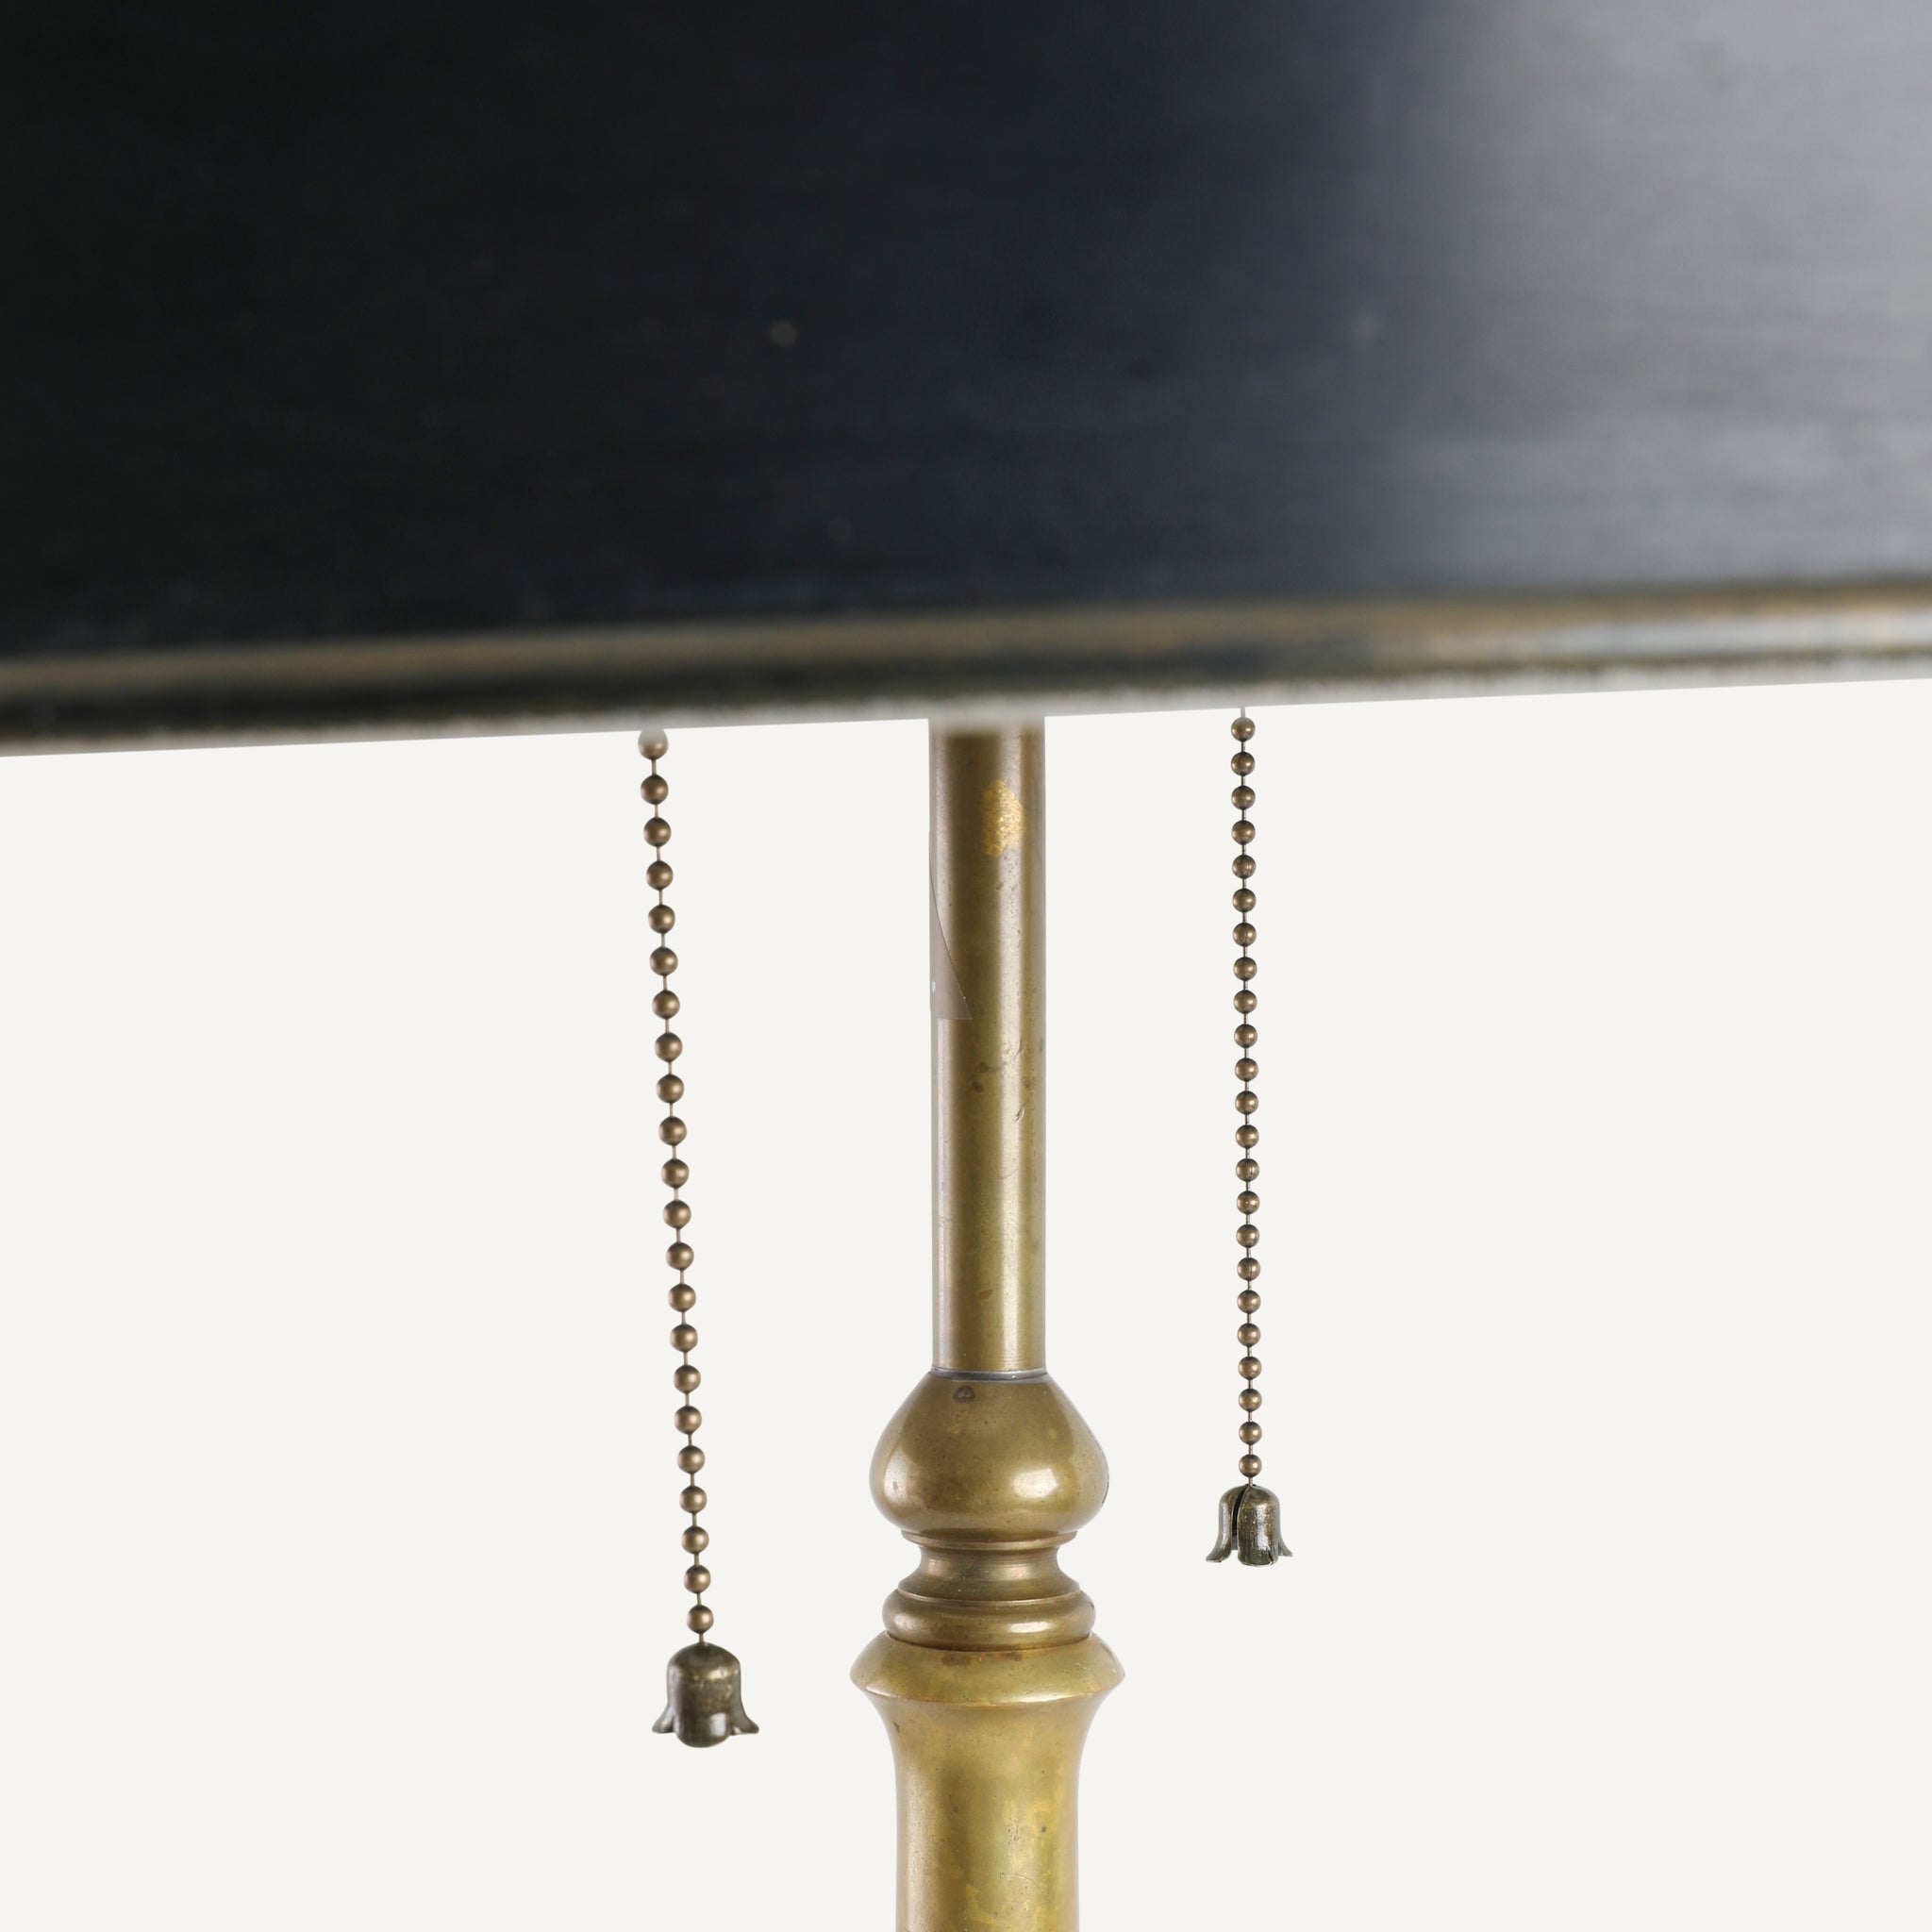 ANTIQUE BRASS LAMP WITH BLACK TOLE SHADE